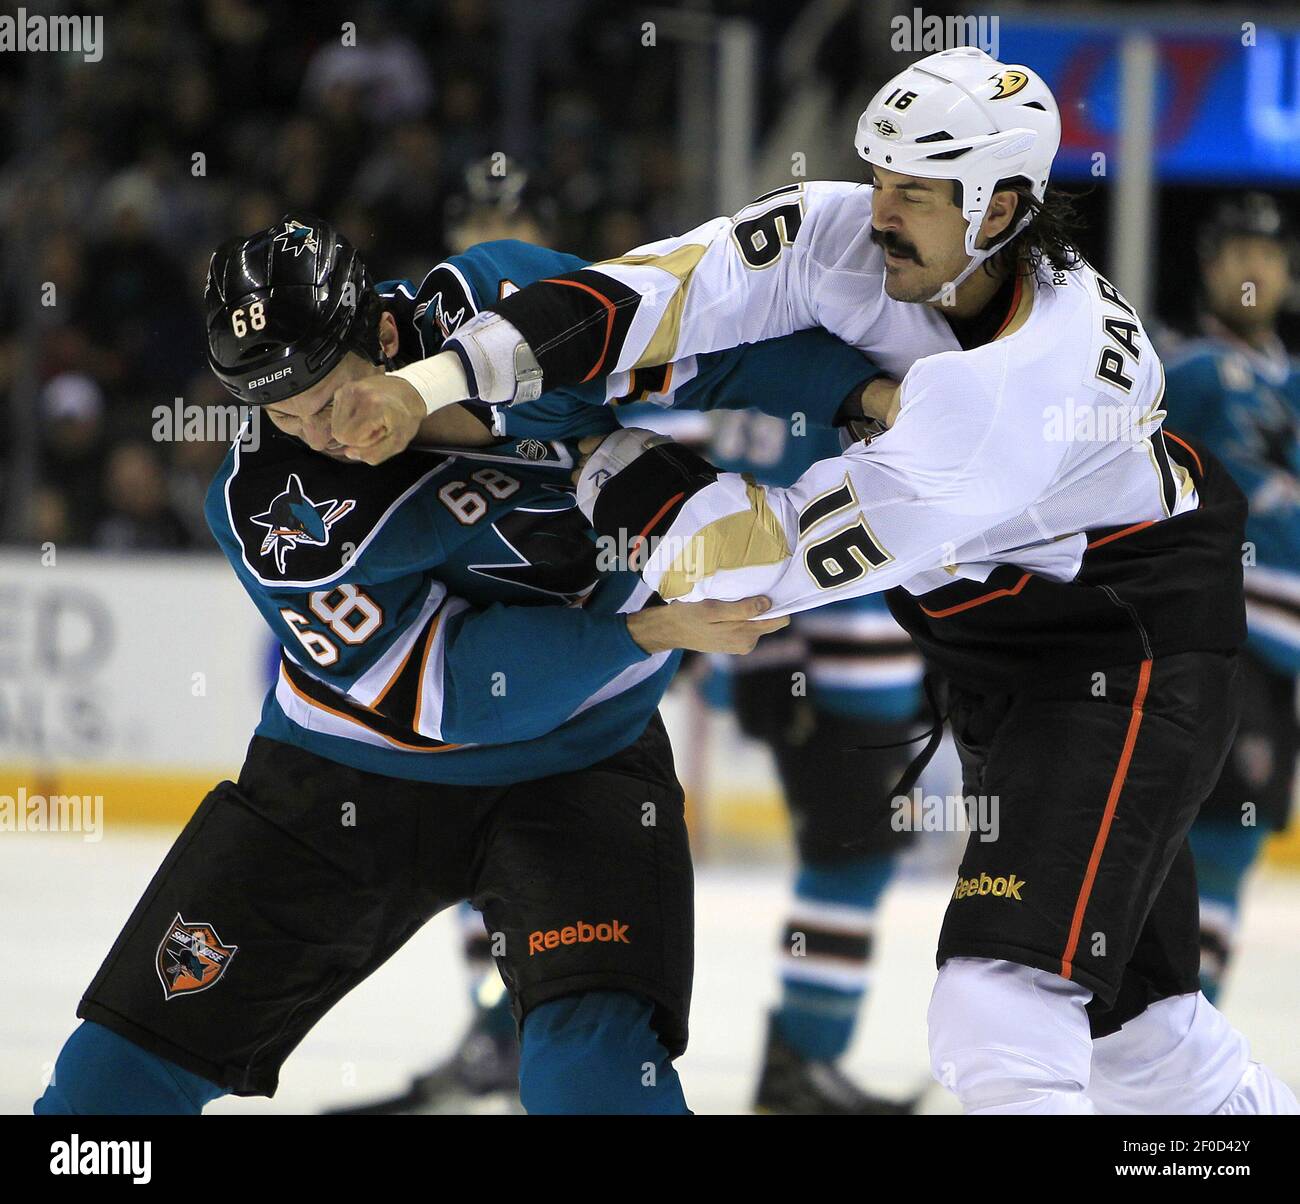 Anaheim Ducks' George Parros (16) fights with Florida Panthers' Krystofer  Barch (21) during the first period of an NHL hockey gameon Sunday, Feb. 19,  2012 in Sunrise, Fla. (AP Photo/Gary I Rothstein